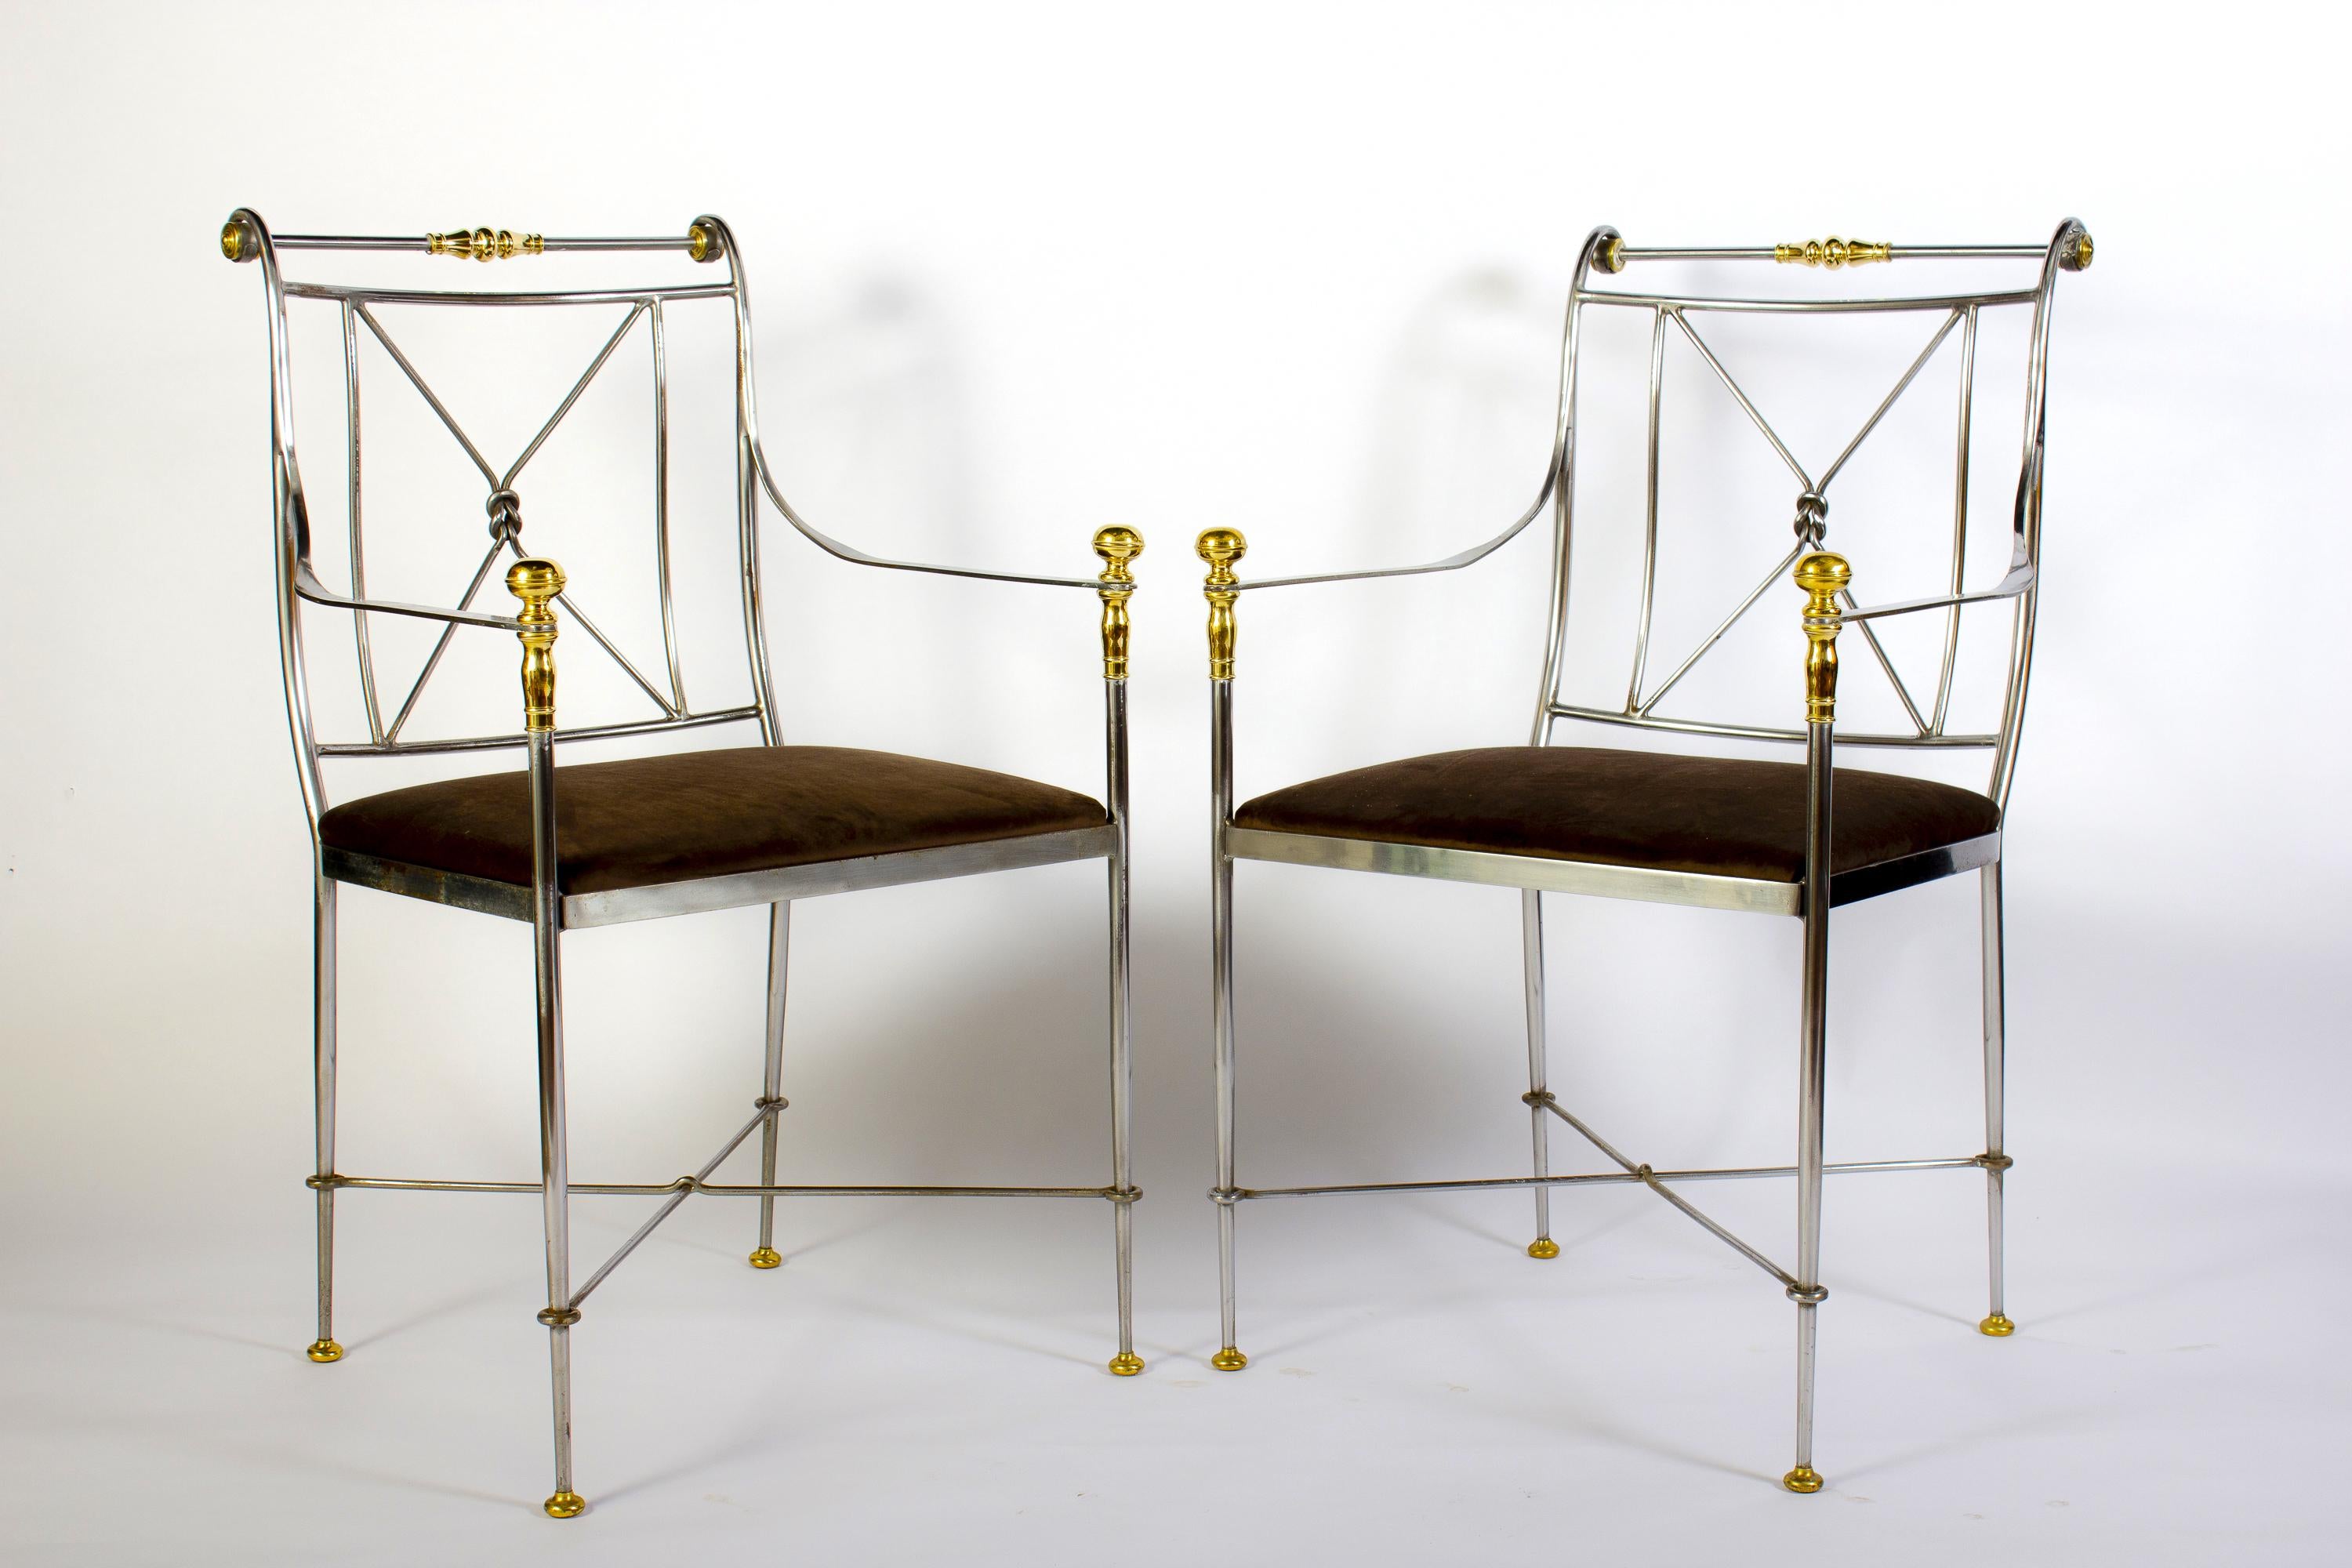 A rare vintage set of eight Italian steel and brass armchairs with dark velvet seats .
Made in Italy and featuring polished steel, solid cast brass.
Each chair has been masterfully welded, crafted ,absolutely wonderful proportions and is